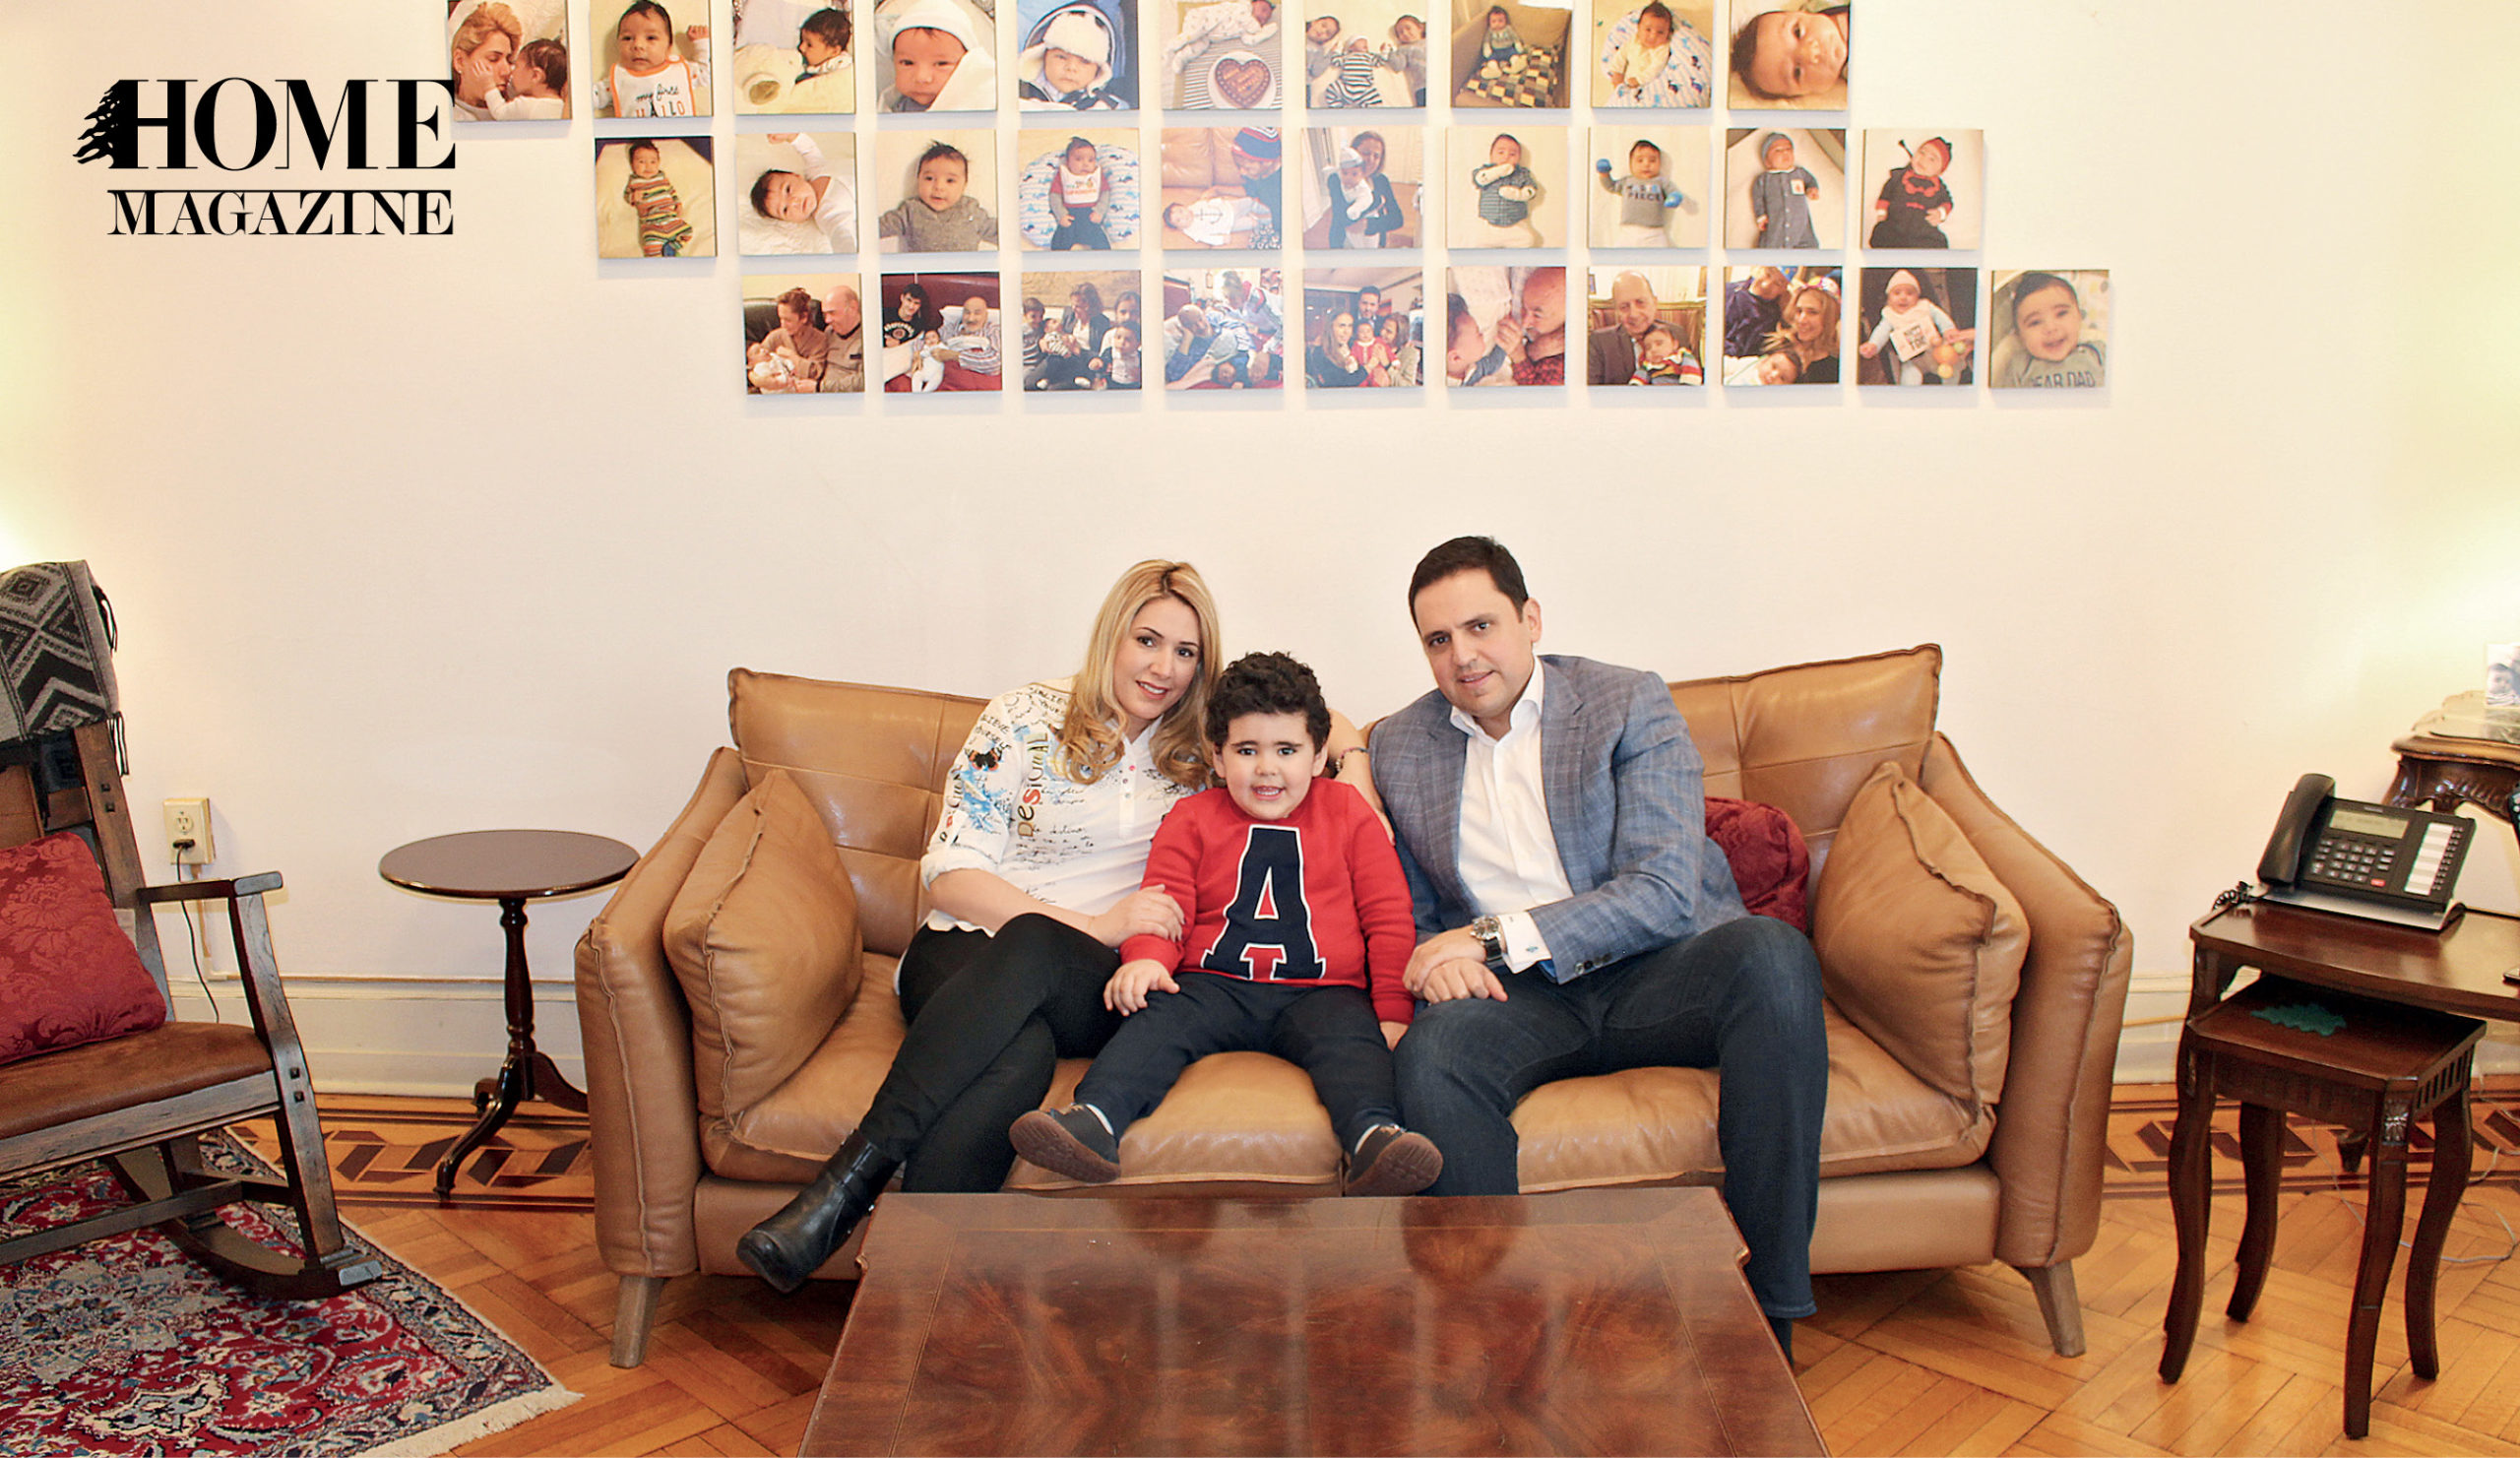 A man, a woman and a child on a couch